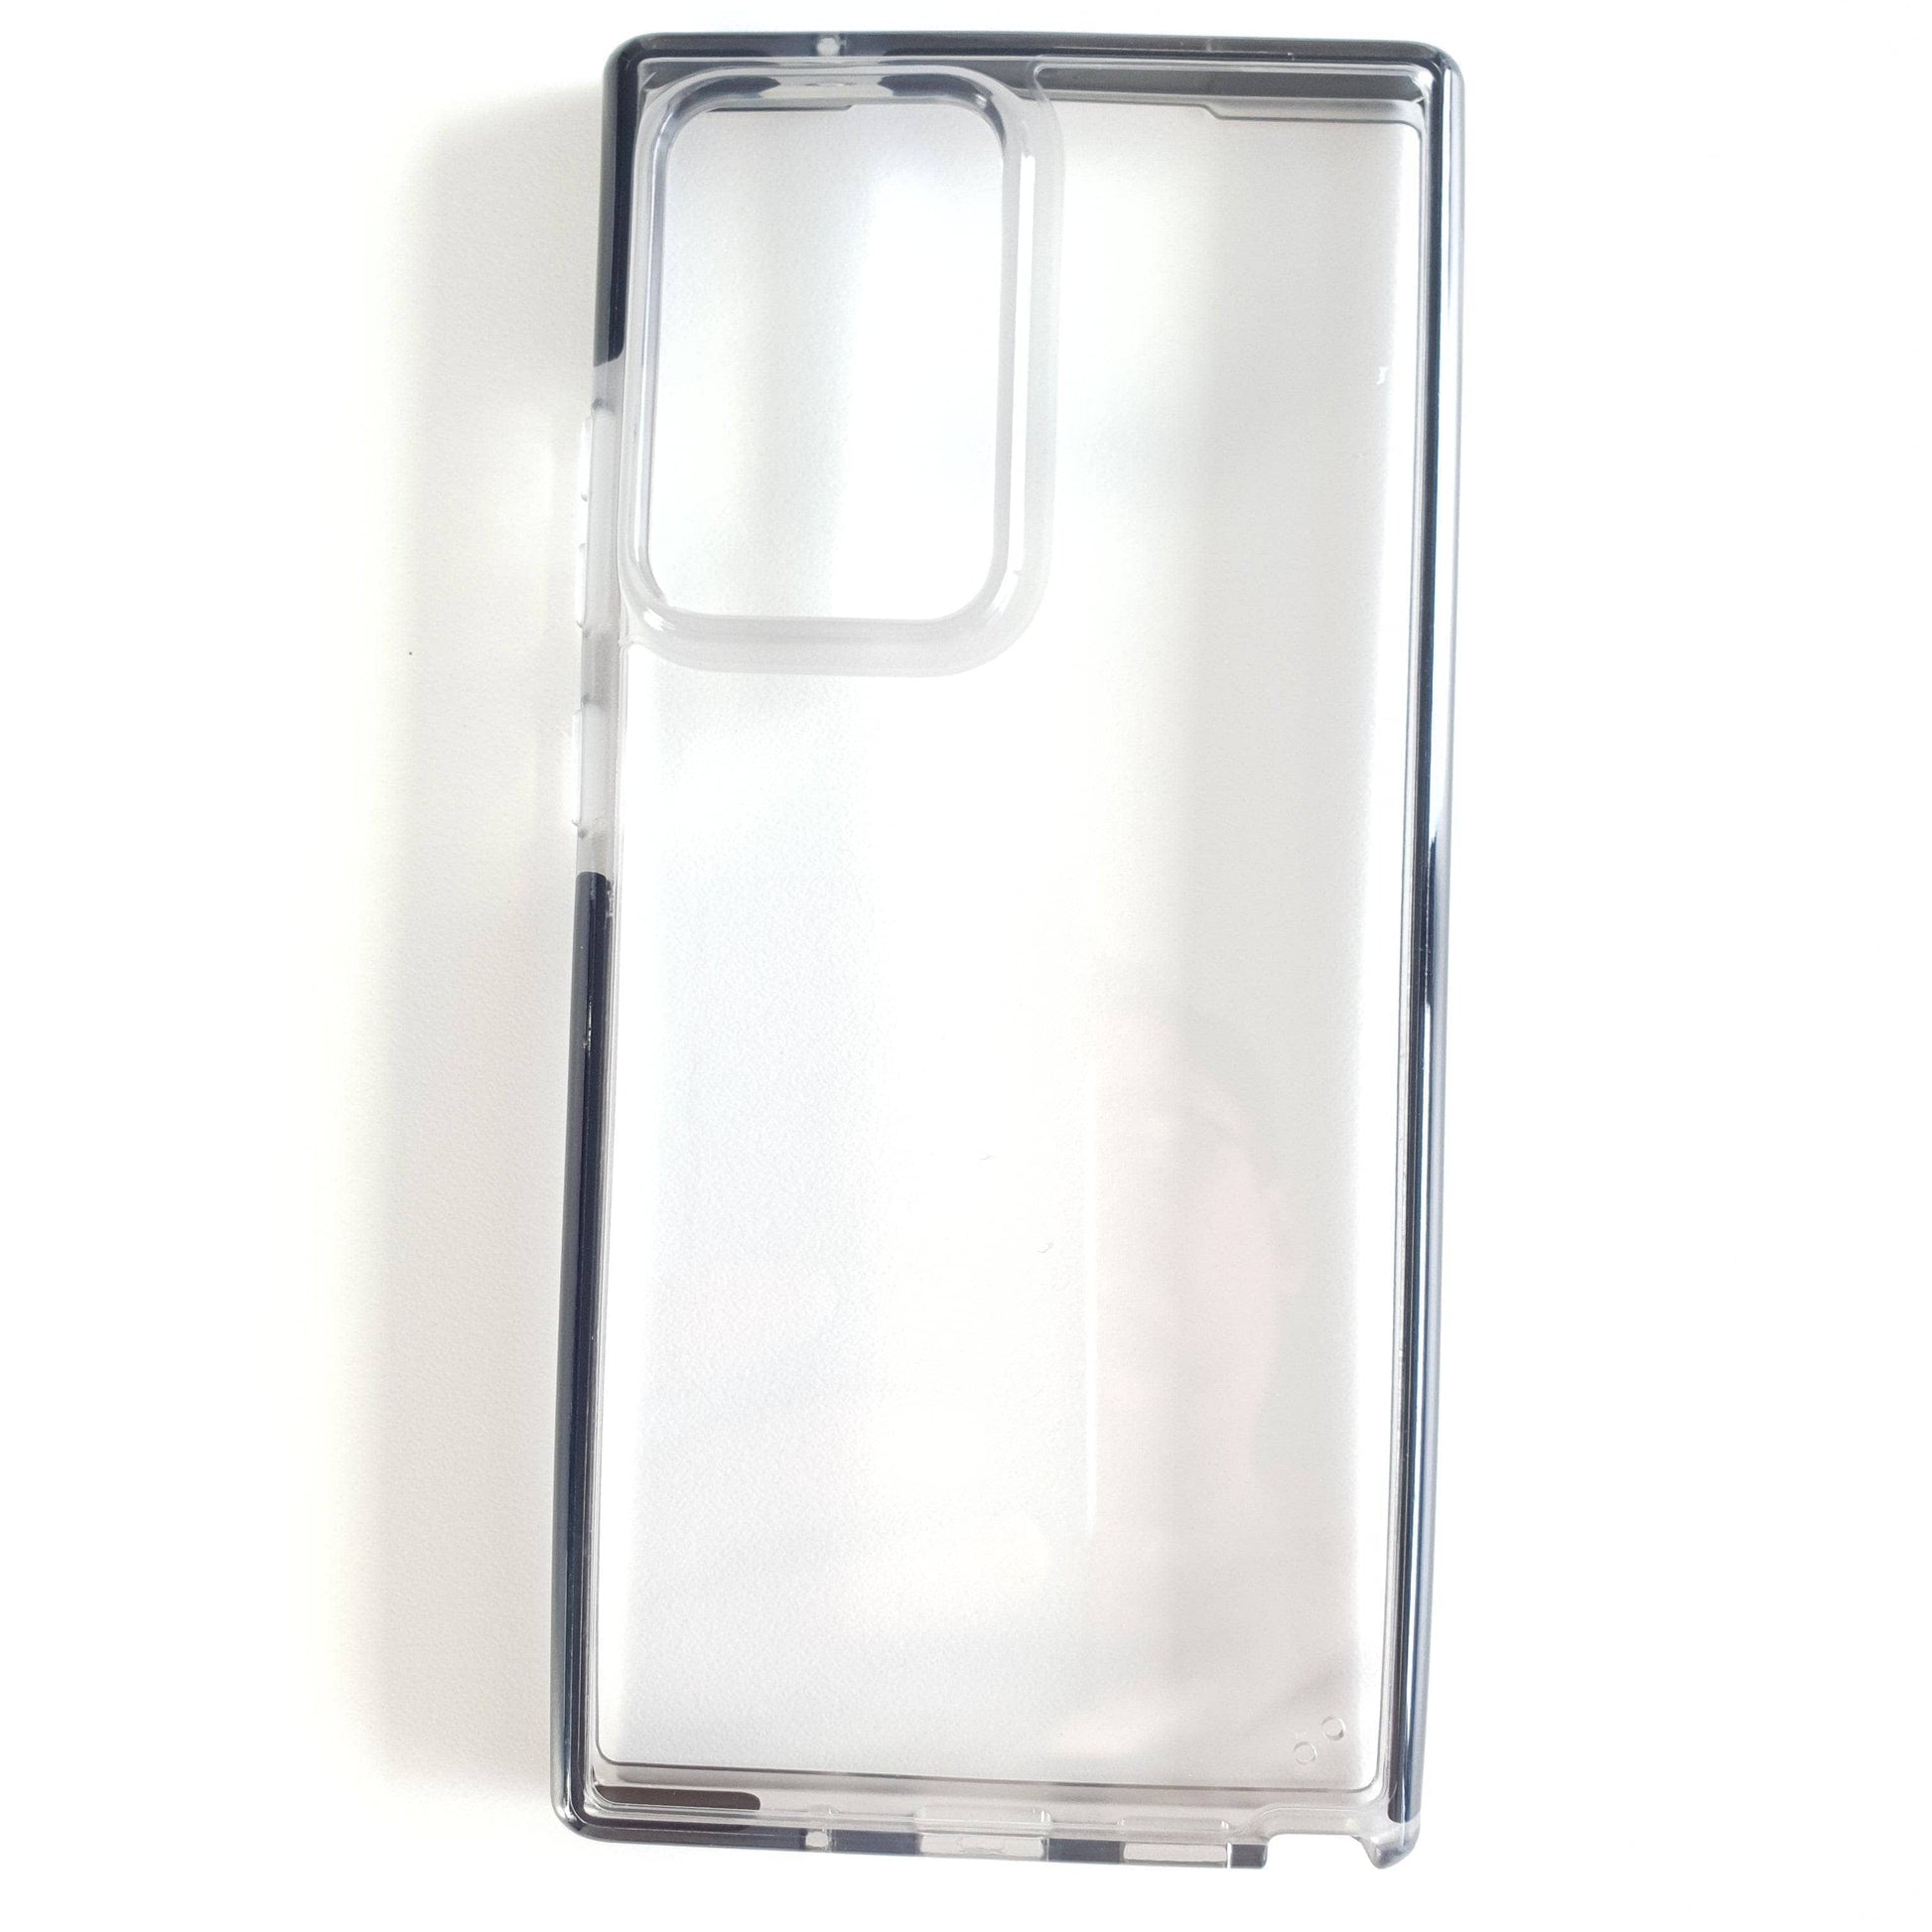 Blacktech D3 Premium Shockproof Hard Clear Back Case for Galaxy Note 20 Ultra/ Note 20-Phone Case-Blacktech-www.PhoneGuy.com.au